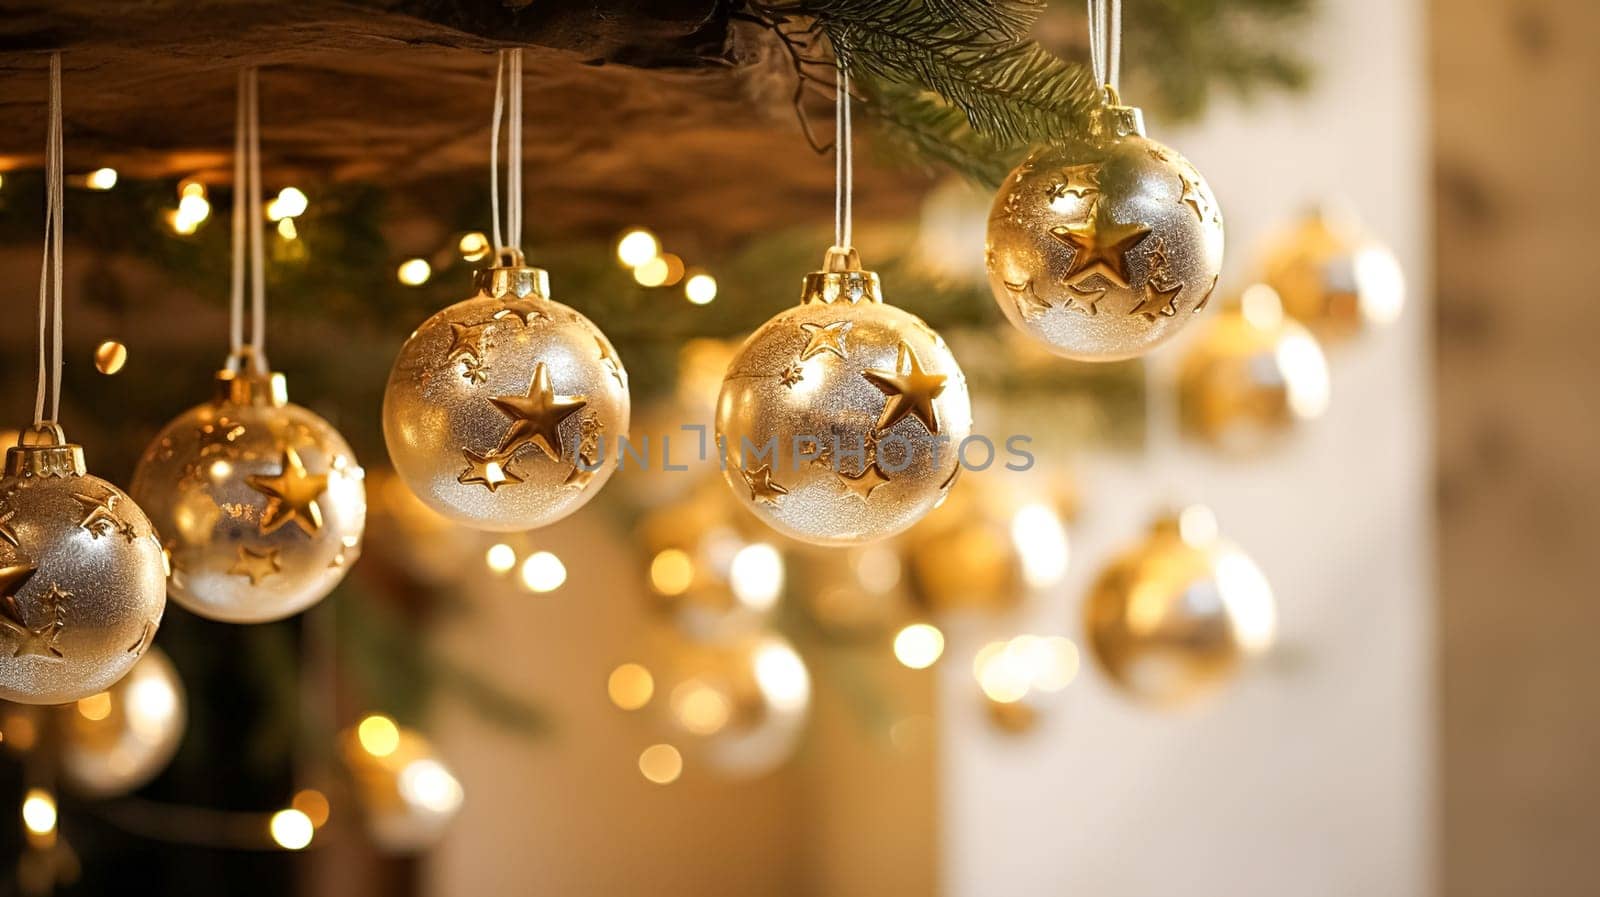 Christmas tree decorations for the English country cottage, home decor, house in the countryside and holiday celebration inspiration